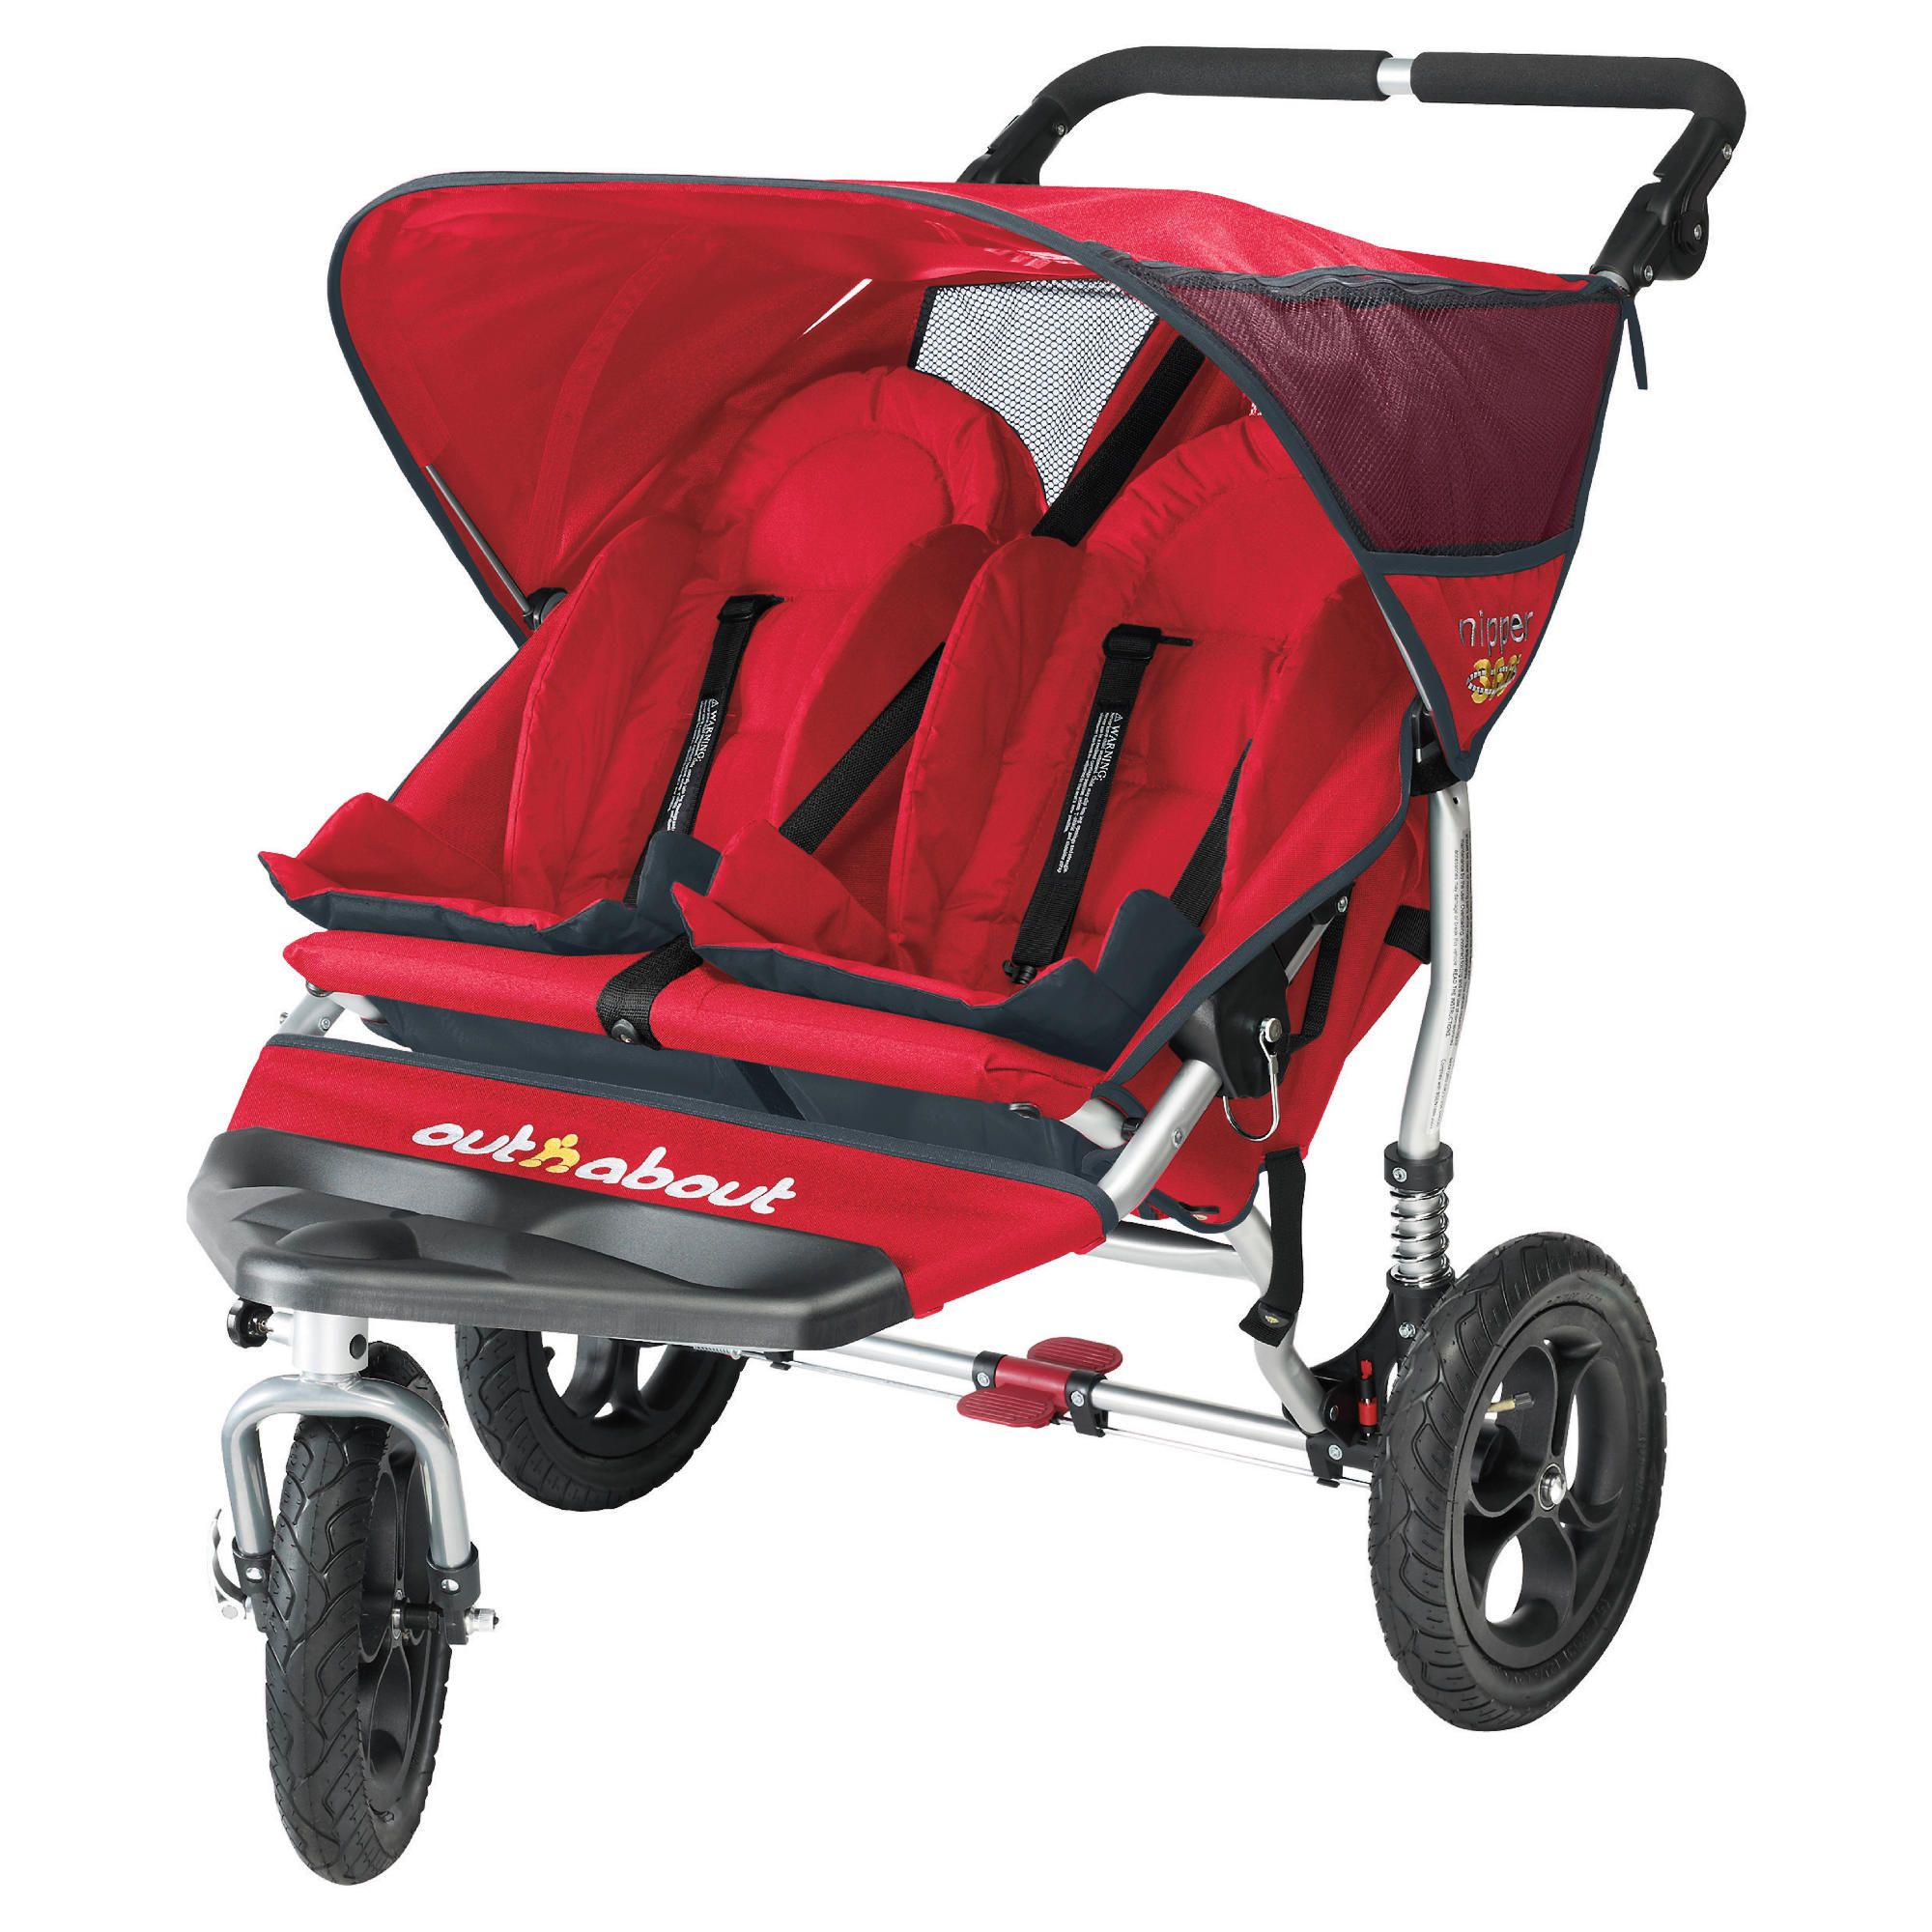 Out 'n' About V2 Nipper 360, 3 wheeler Double Pushchair, Red at Tescos Direct